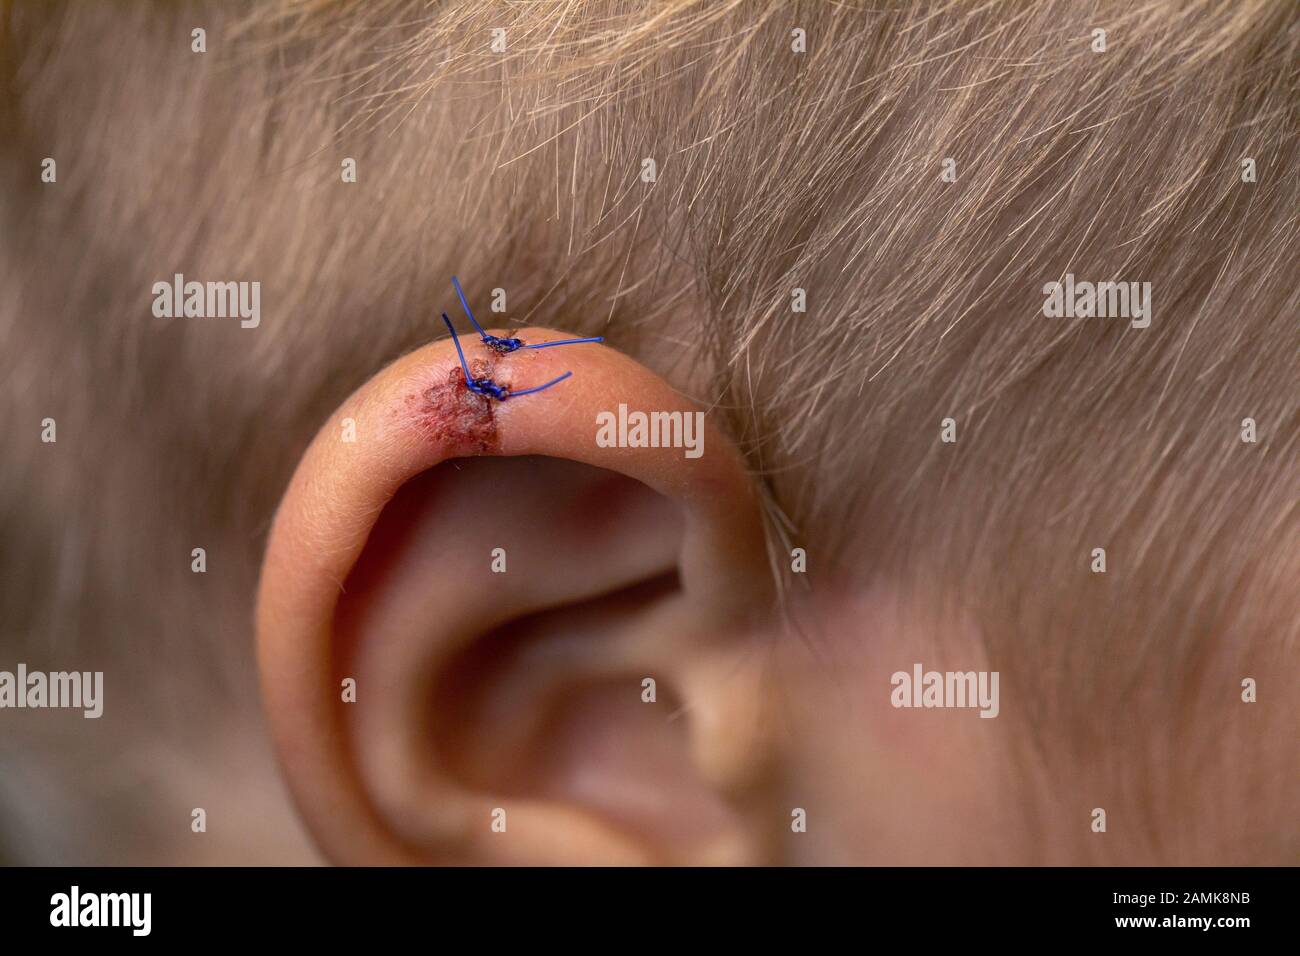 Wound stitches. Medical, surgical concept. Torn wounds with stitches on child ear. close-up of laceration human ear with suture. Stock Photo